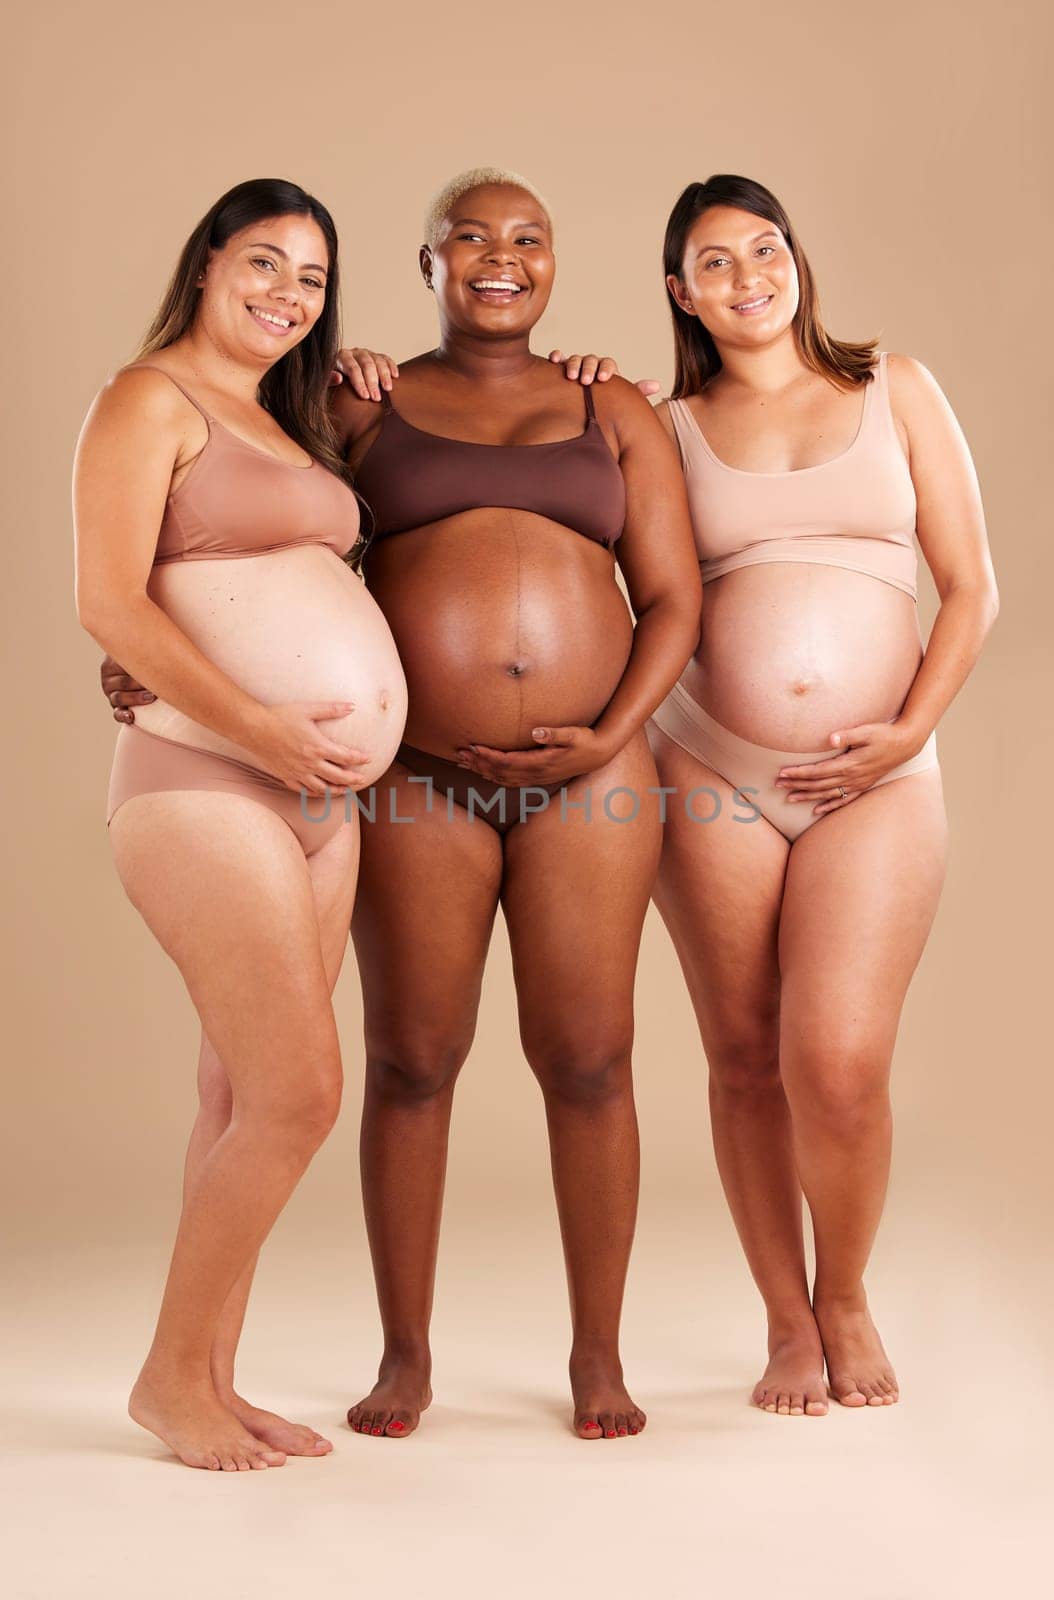 Pregnant, body and portrait of women in stomach support touch, hope and community diversity on studio background. Smile, happy and pregnancy friends in underwear, belly growth and healthcare wellness.